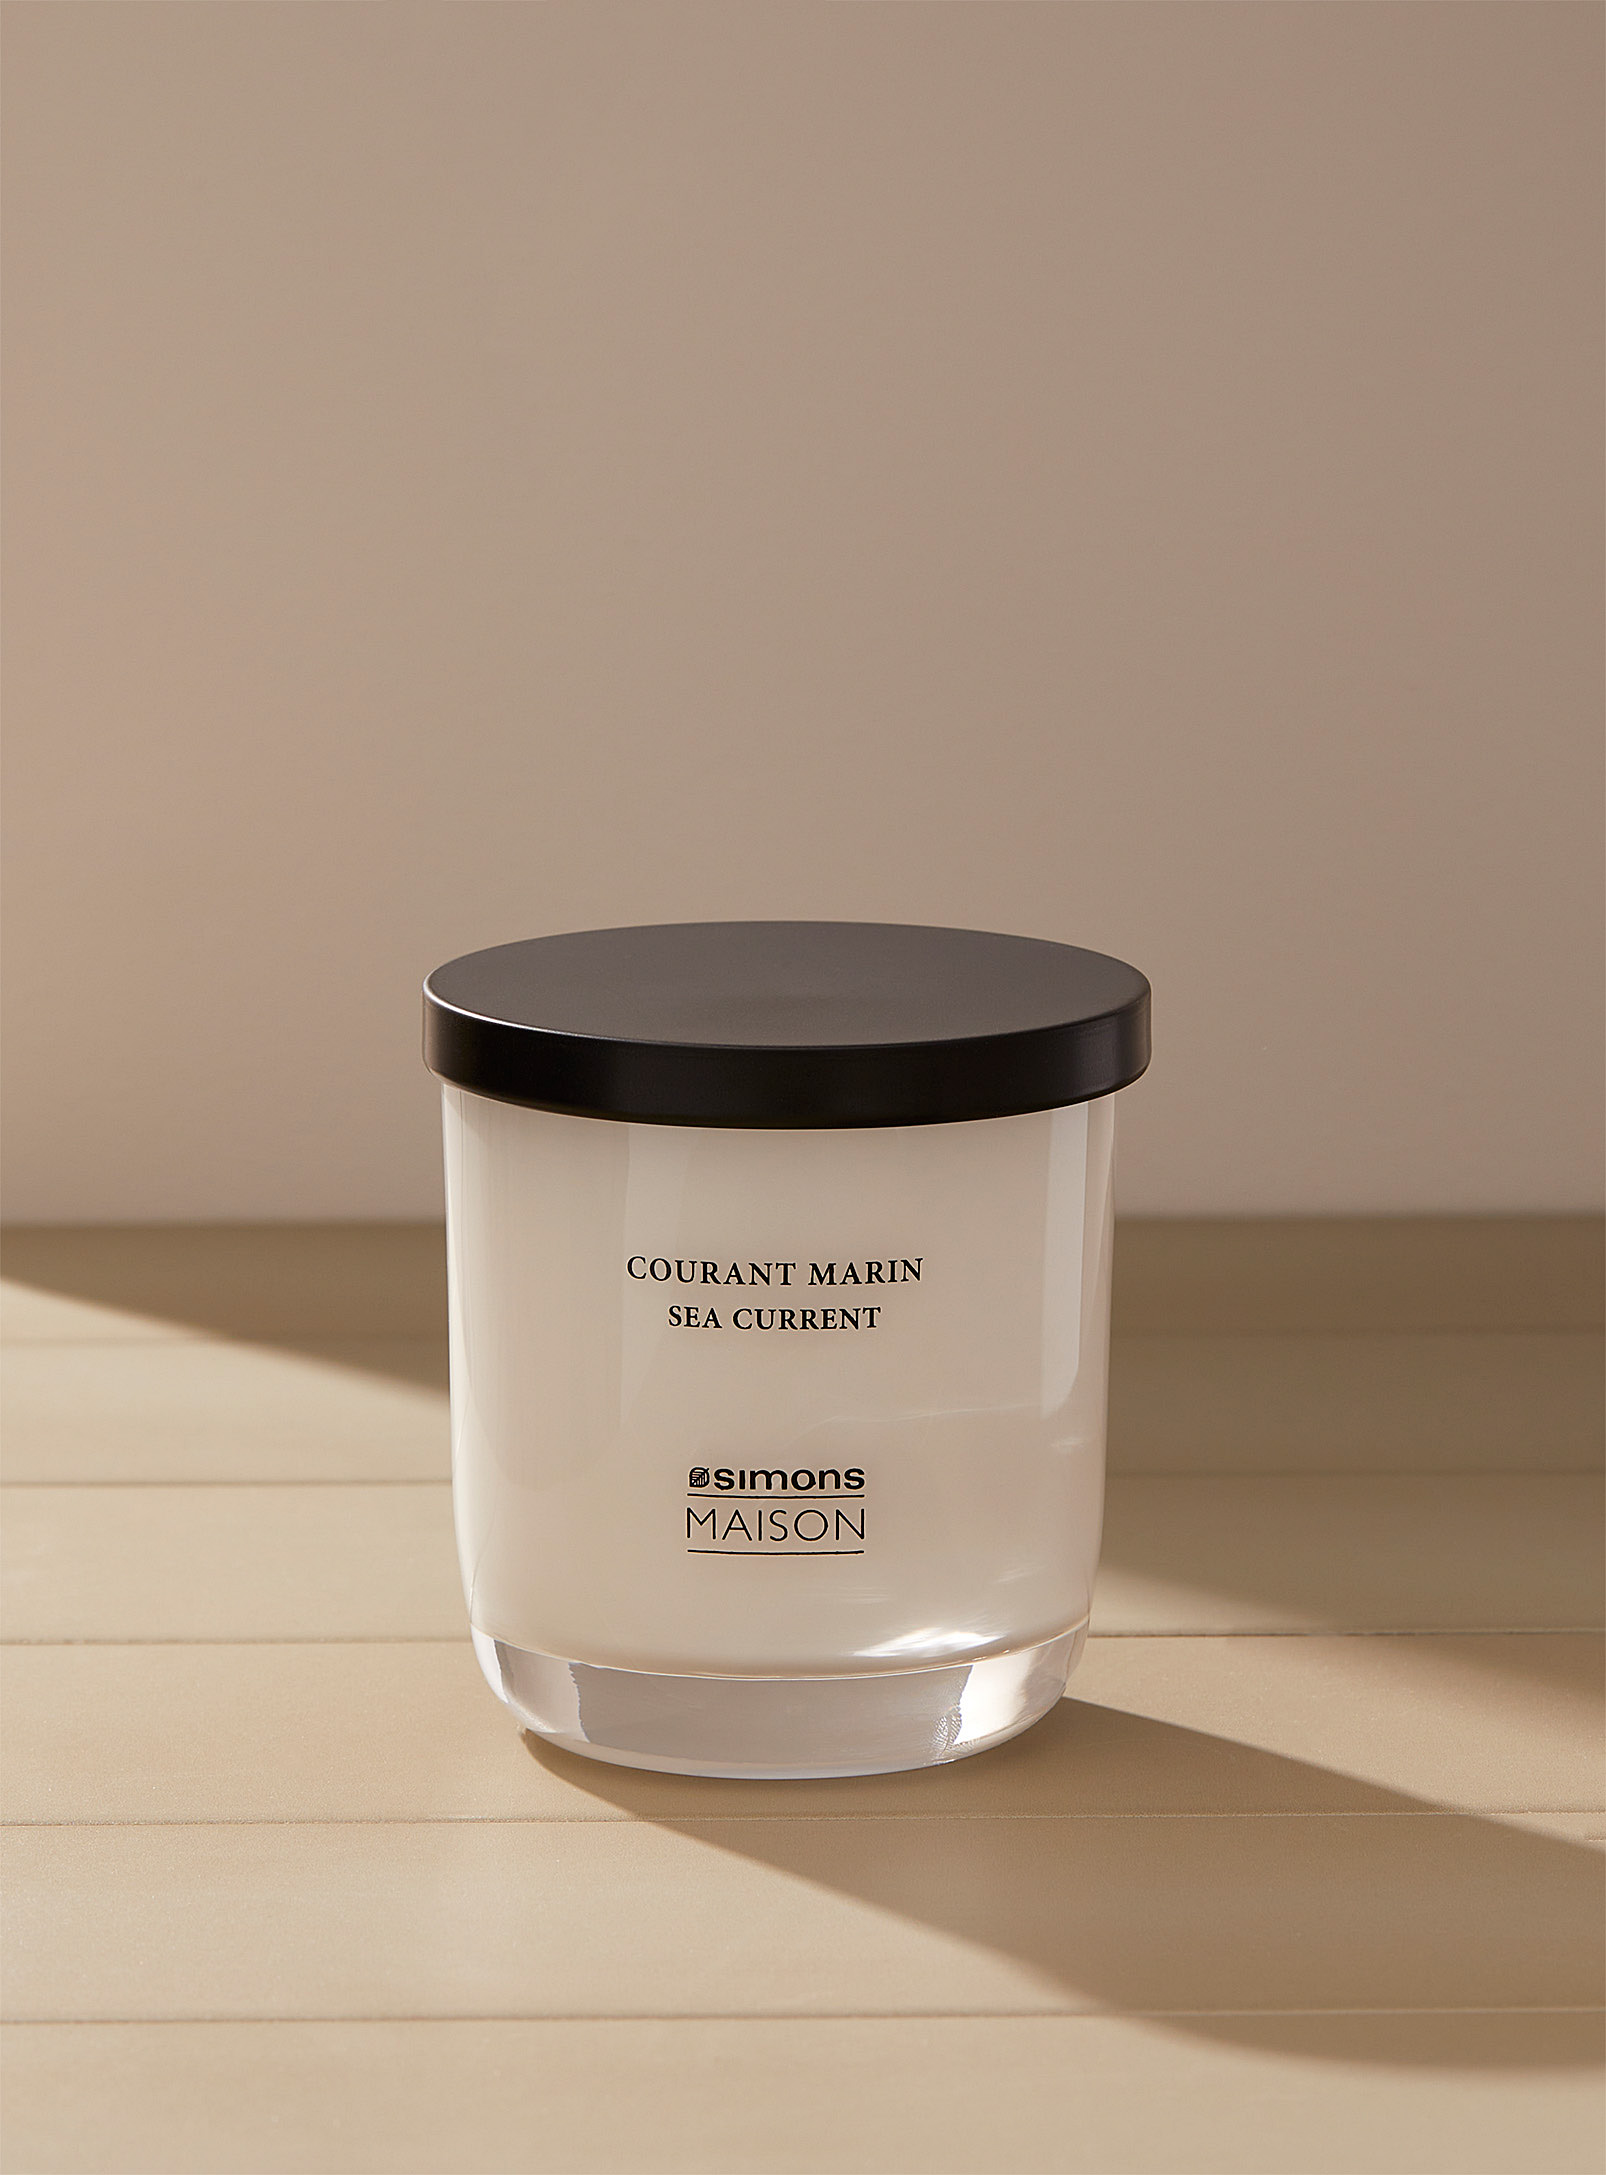 Simons Maison Sea Current Scented Candle In White